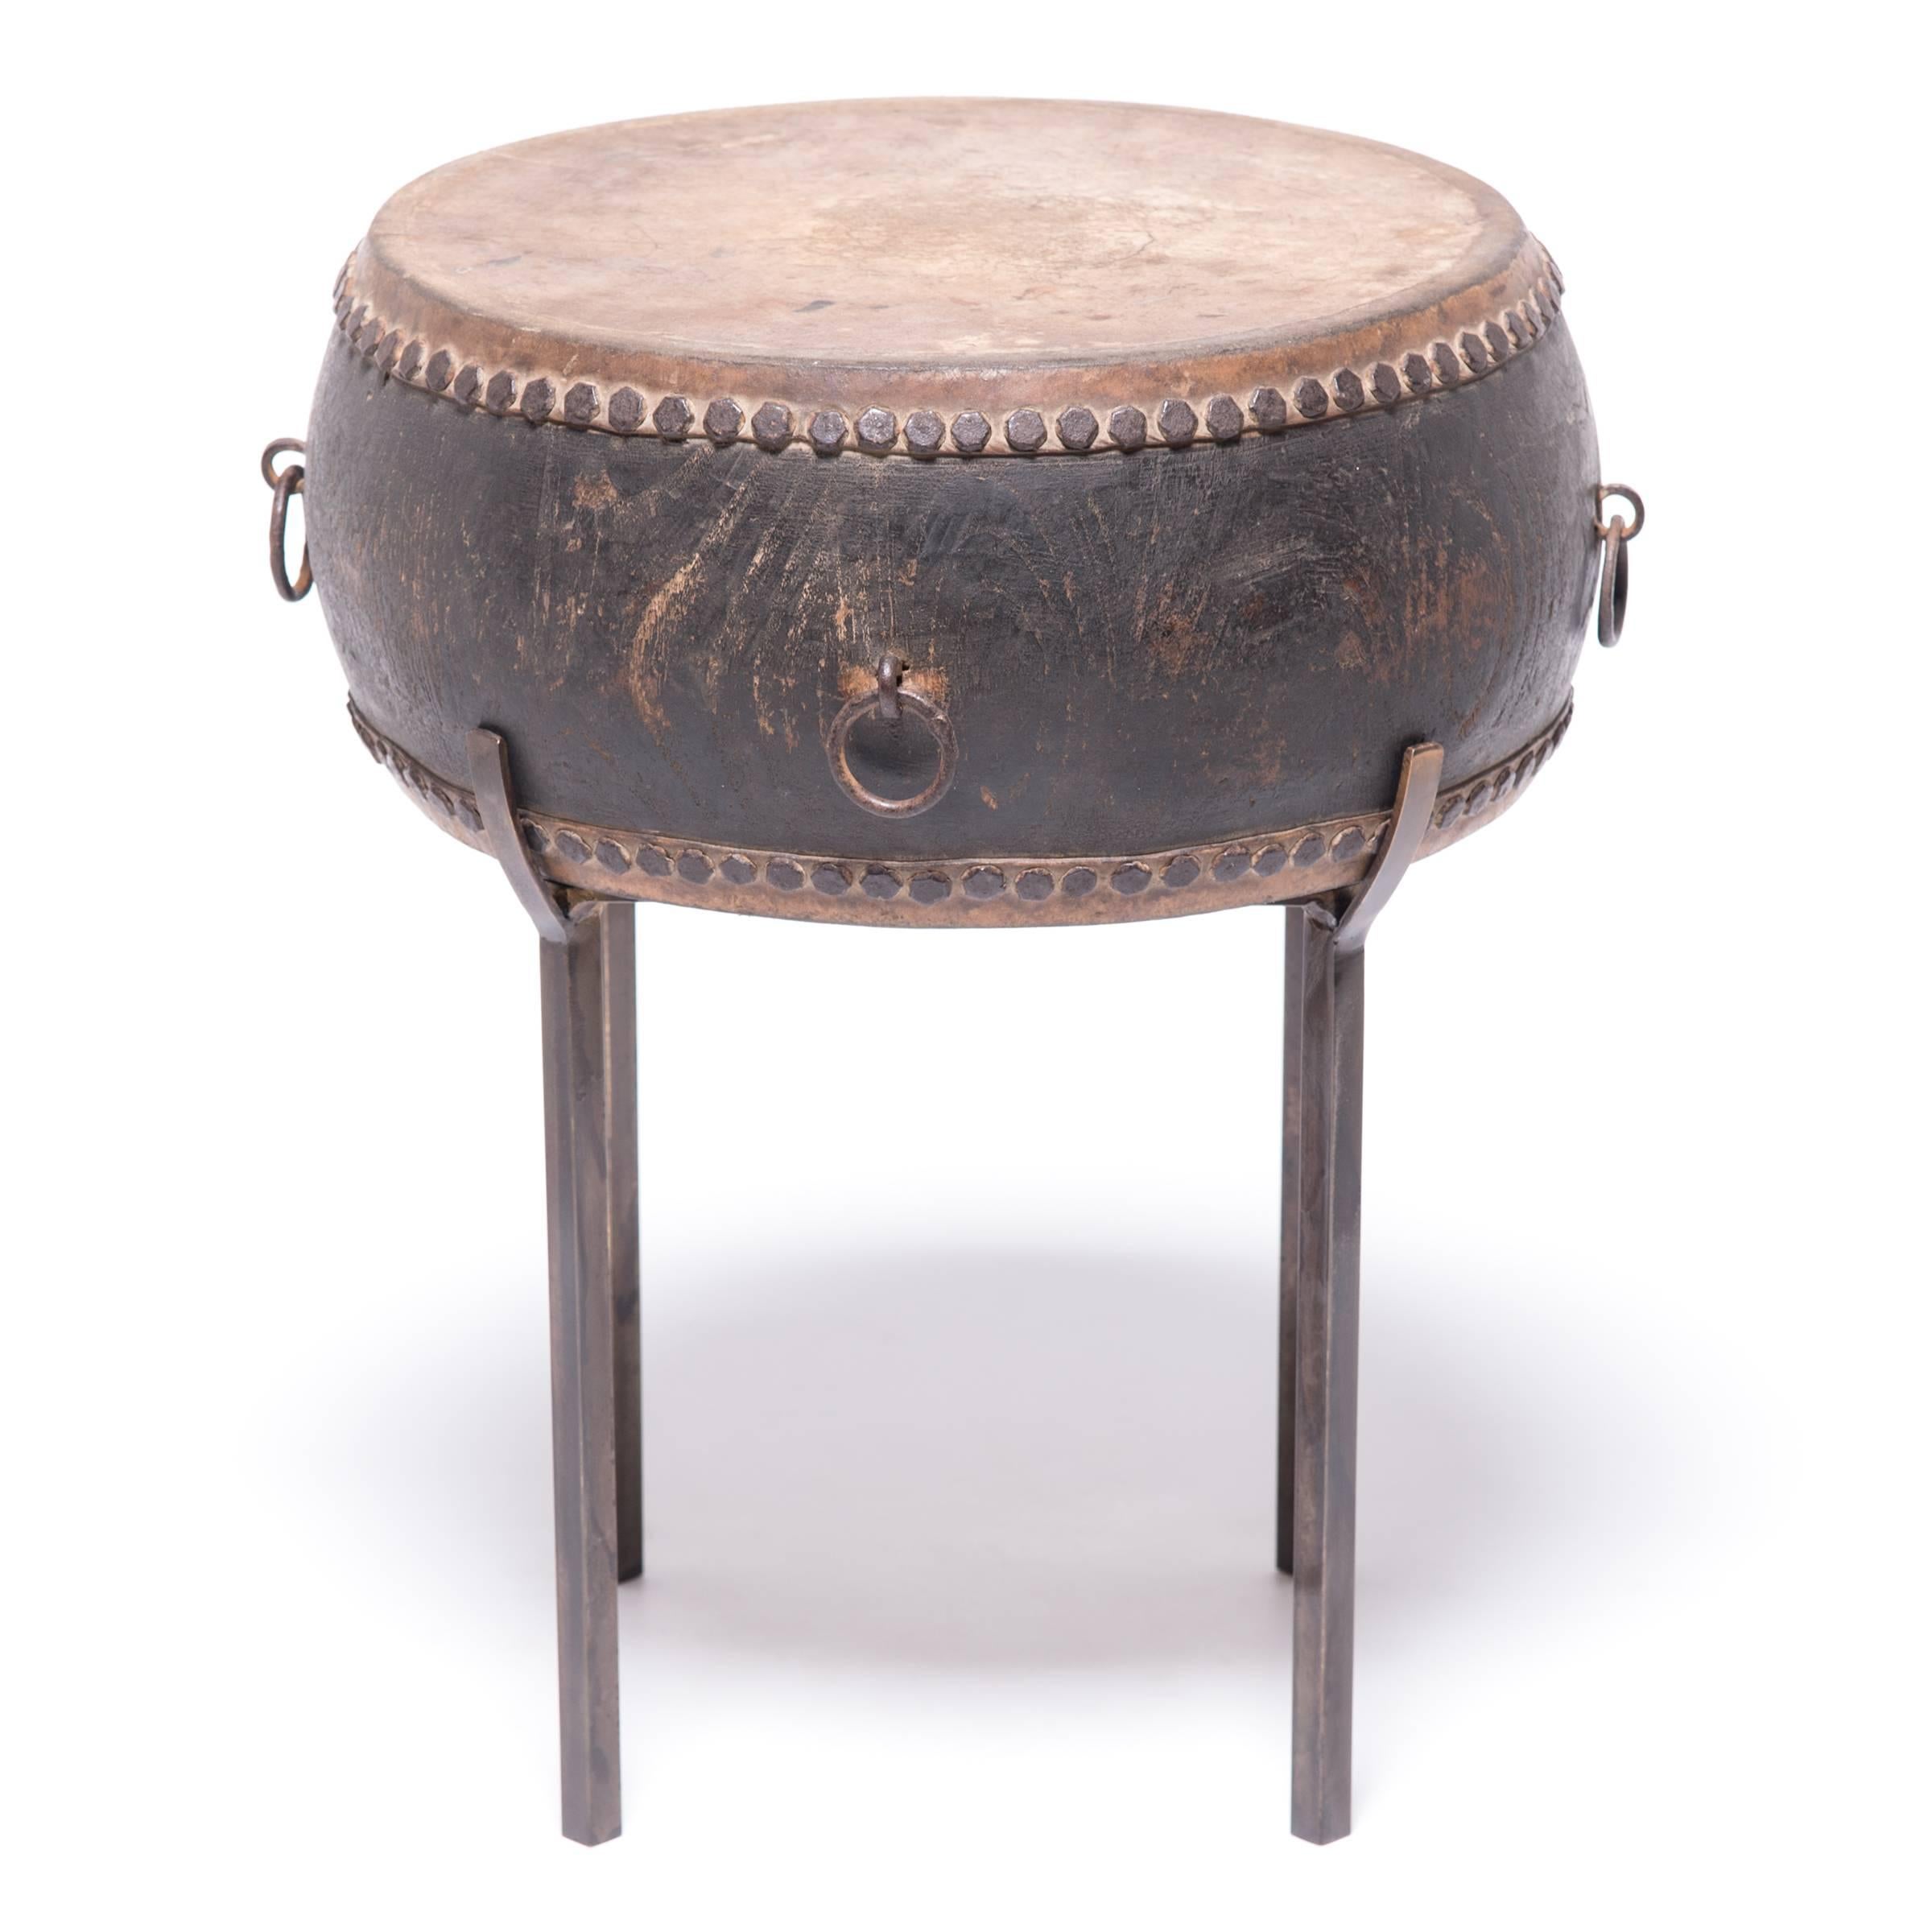 This late 19th-early 20th century wooden drum was made by hand in Beijing, China. The hide top and bottom is finished with handmade iron nailheads. This drum would have originally been used in a procession or possibly as part of a Peking opera